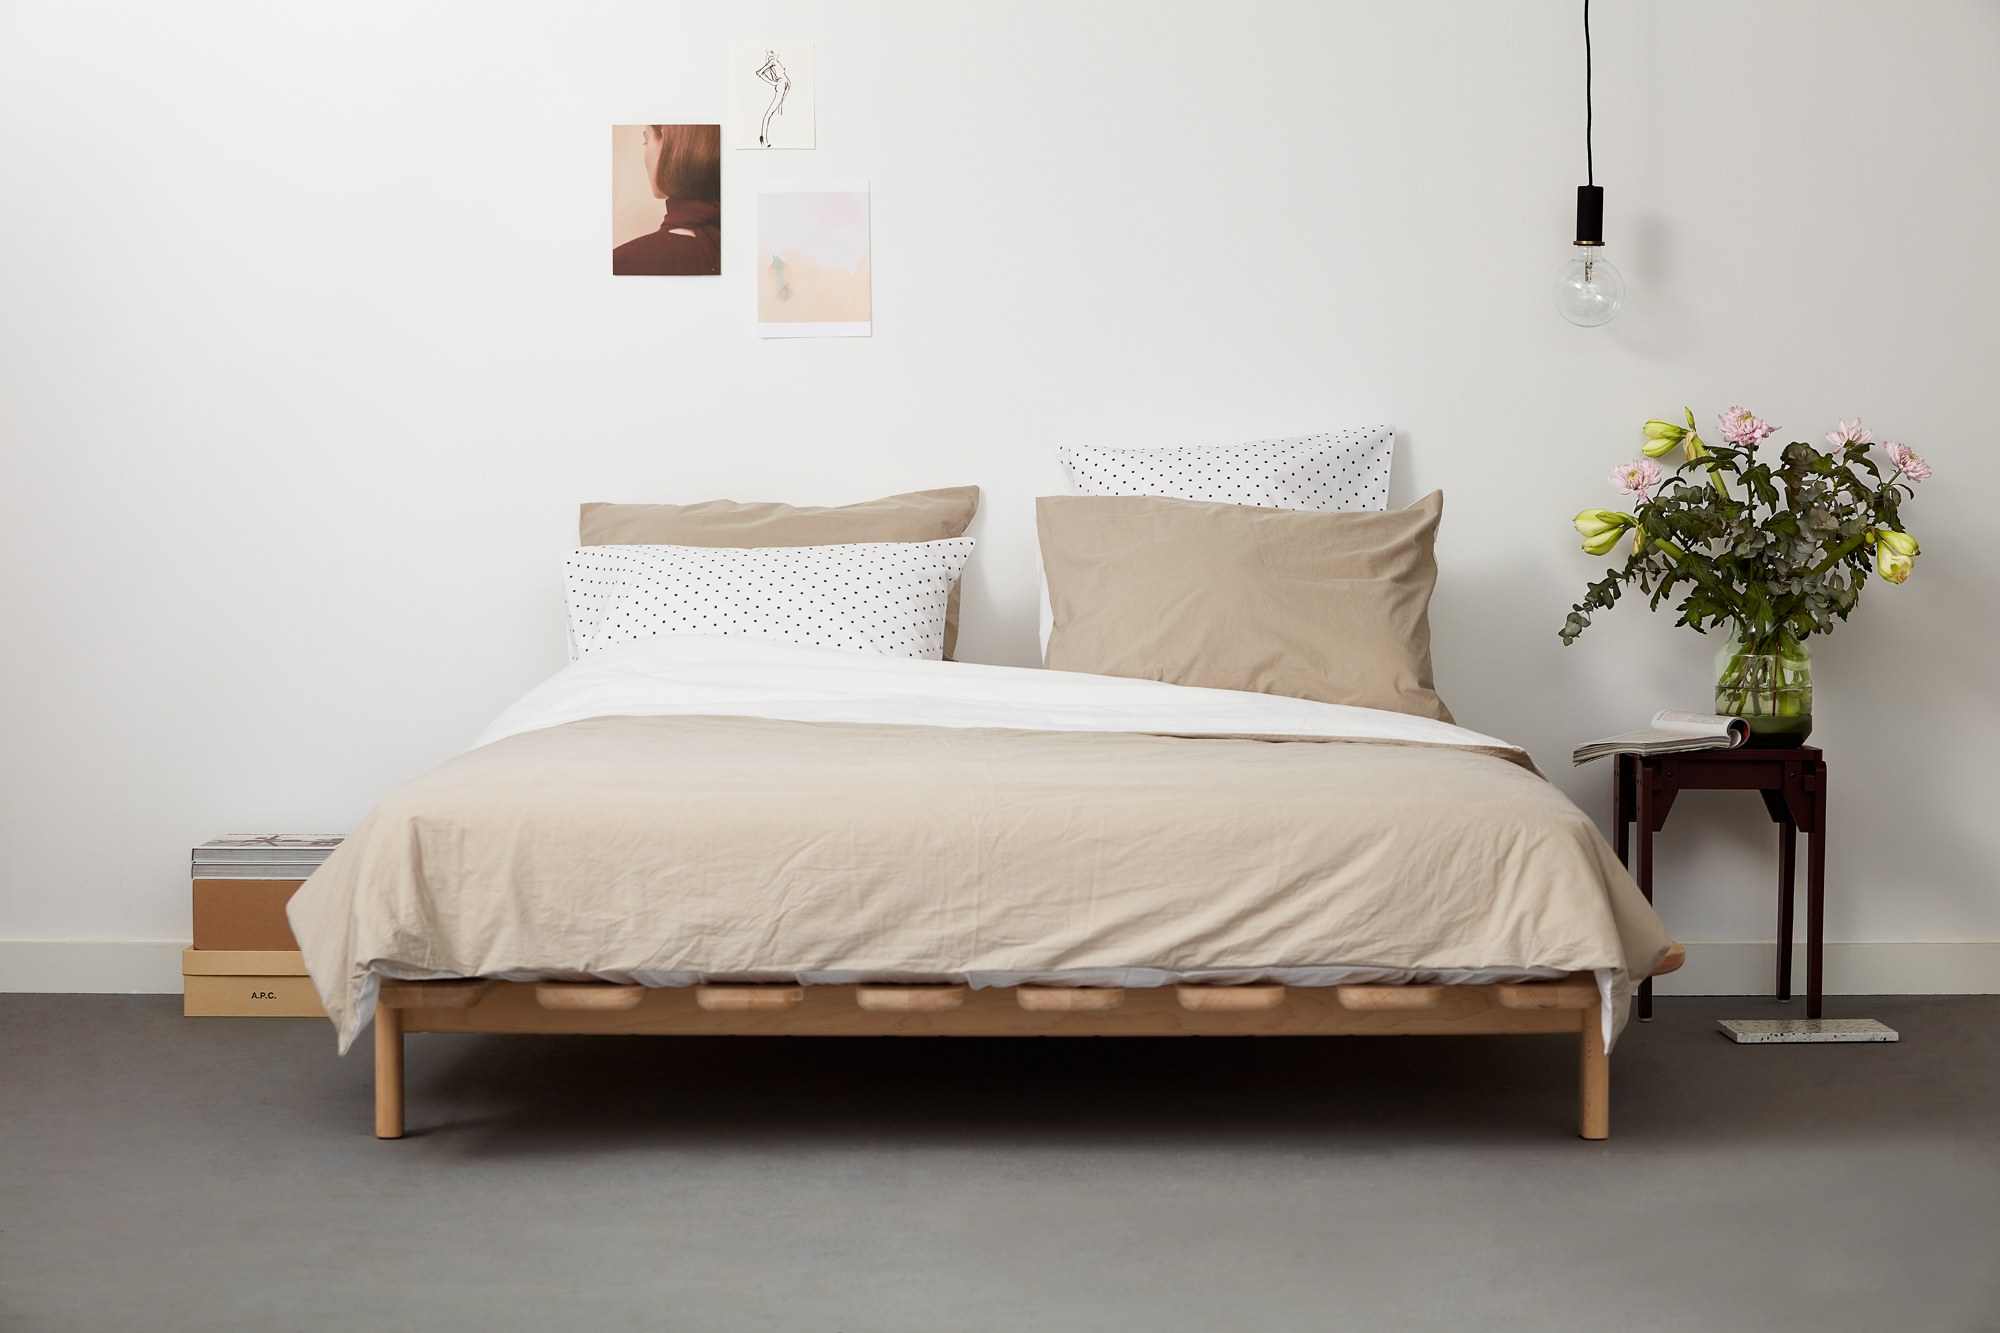 Modest Bed by Justin Jorissen for Loof